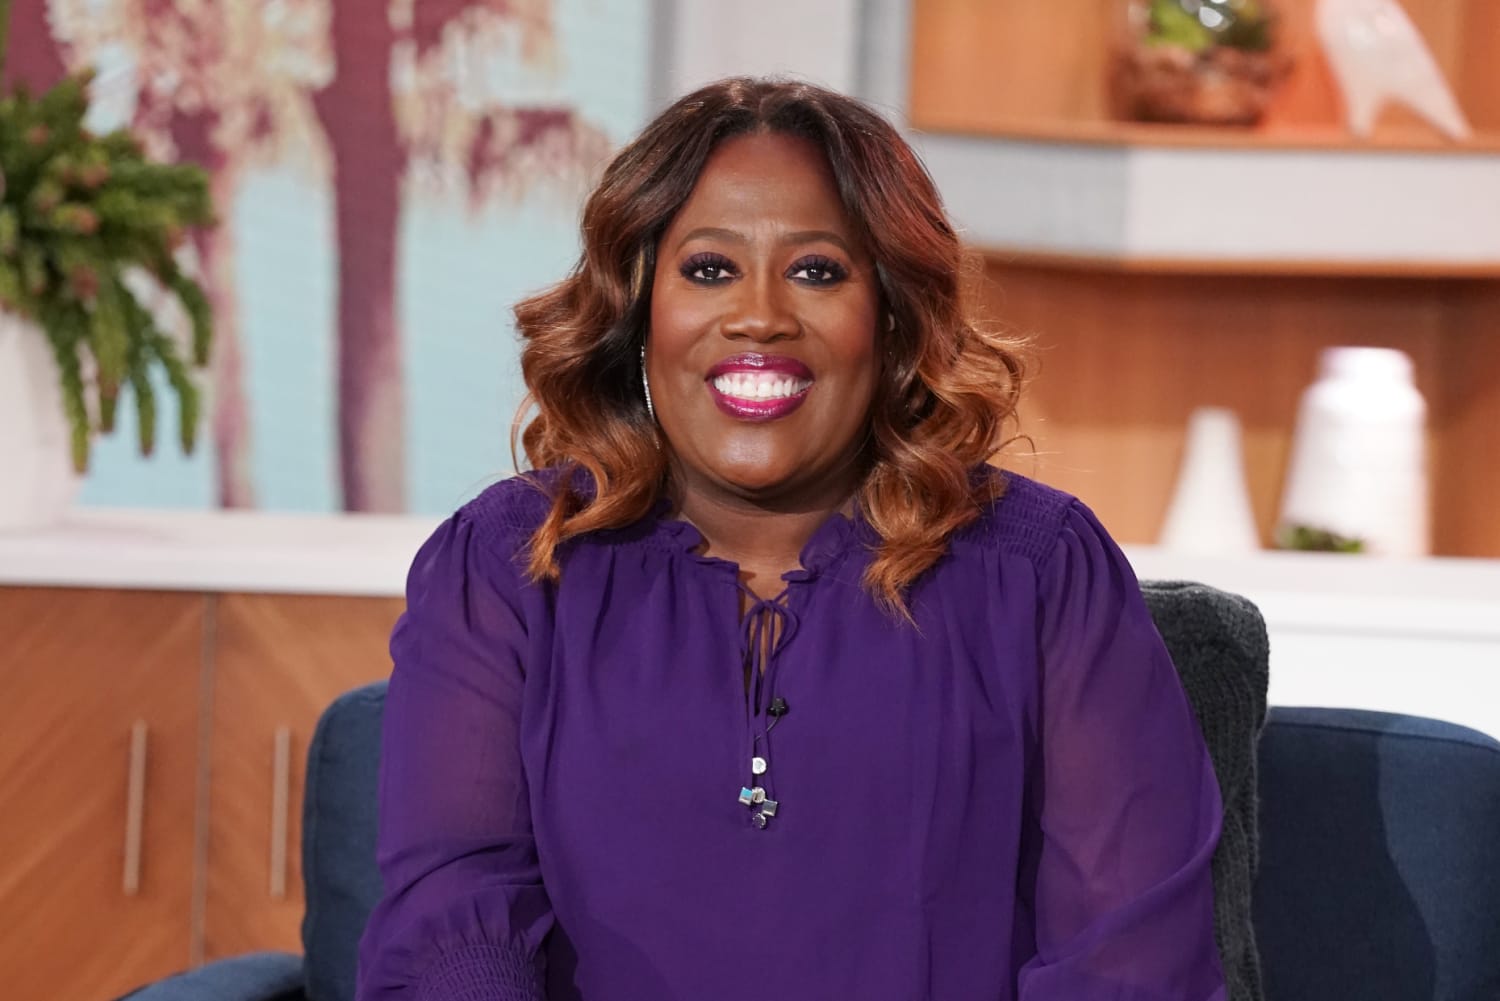 The 59-year old daughter of father (?) and mother(?) Sheryl Underwood in 2023 photo. Sheryl Underwood earned a  million dollar salary - leaving the net worth at  million in 2023